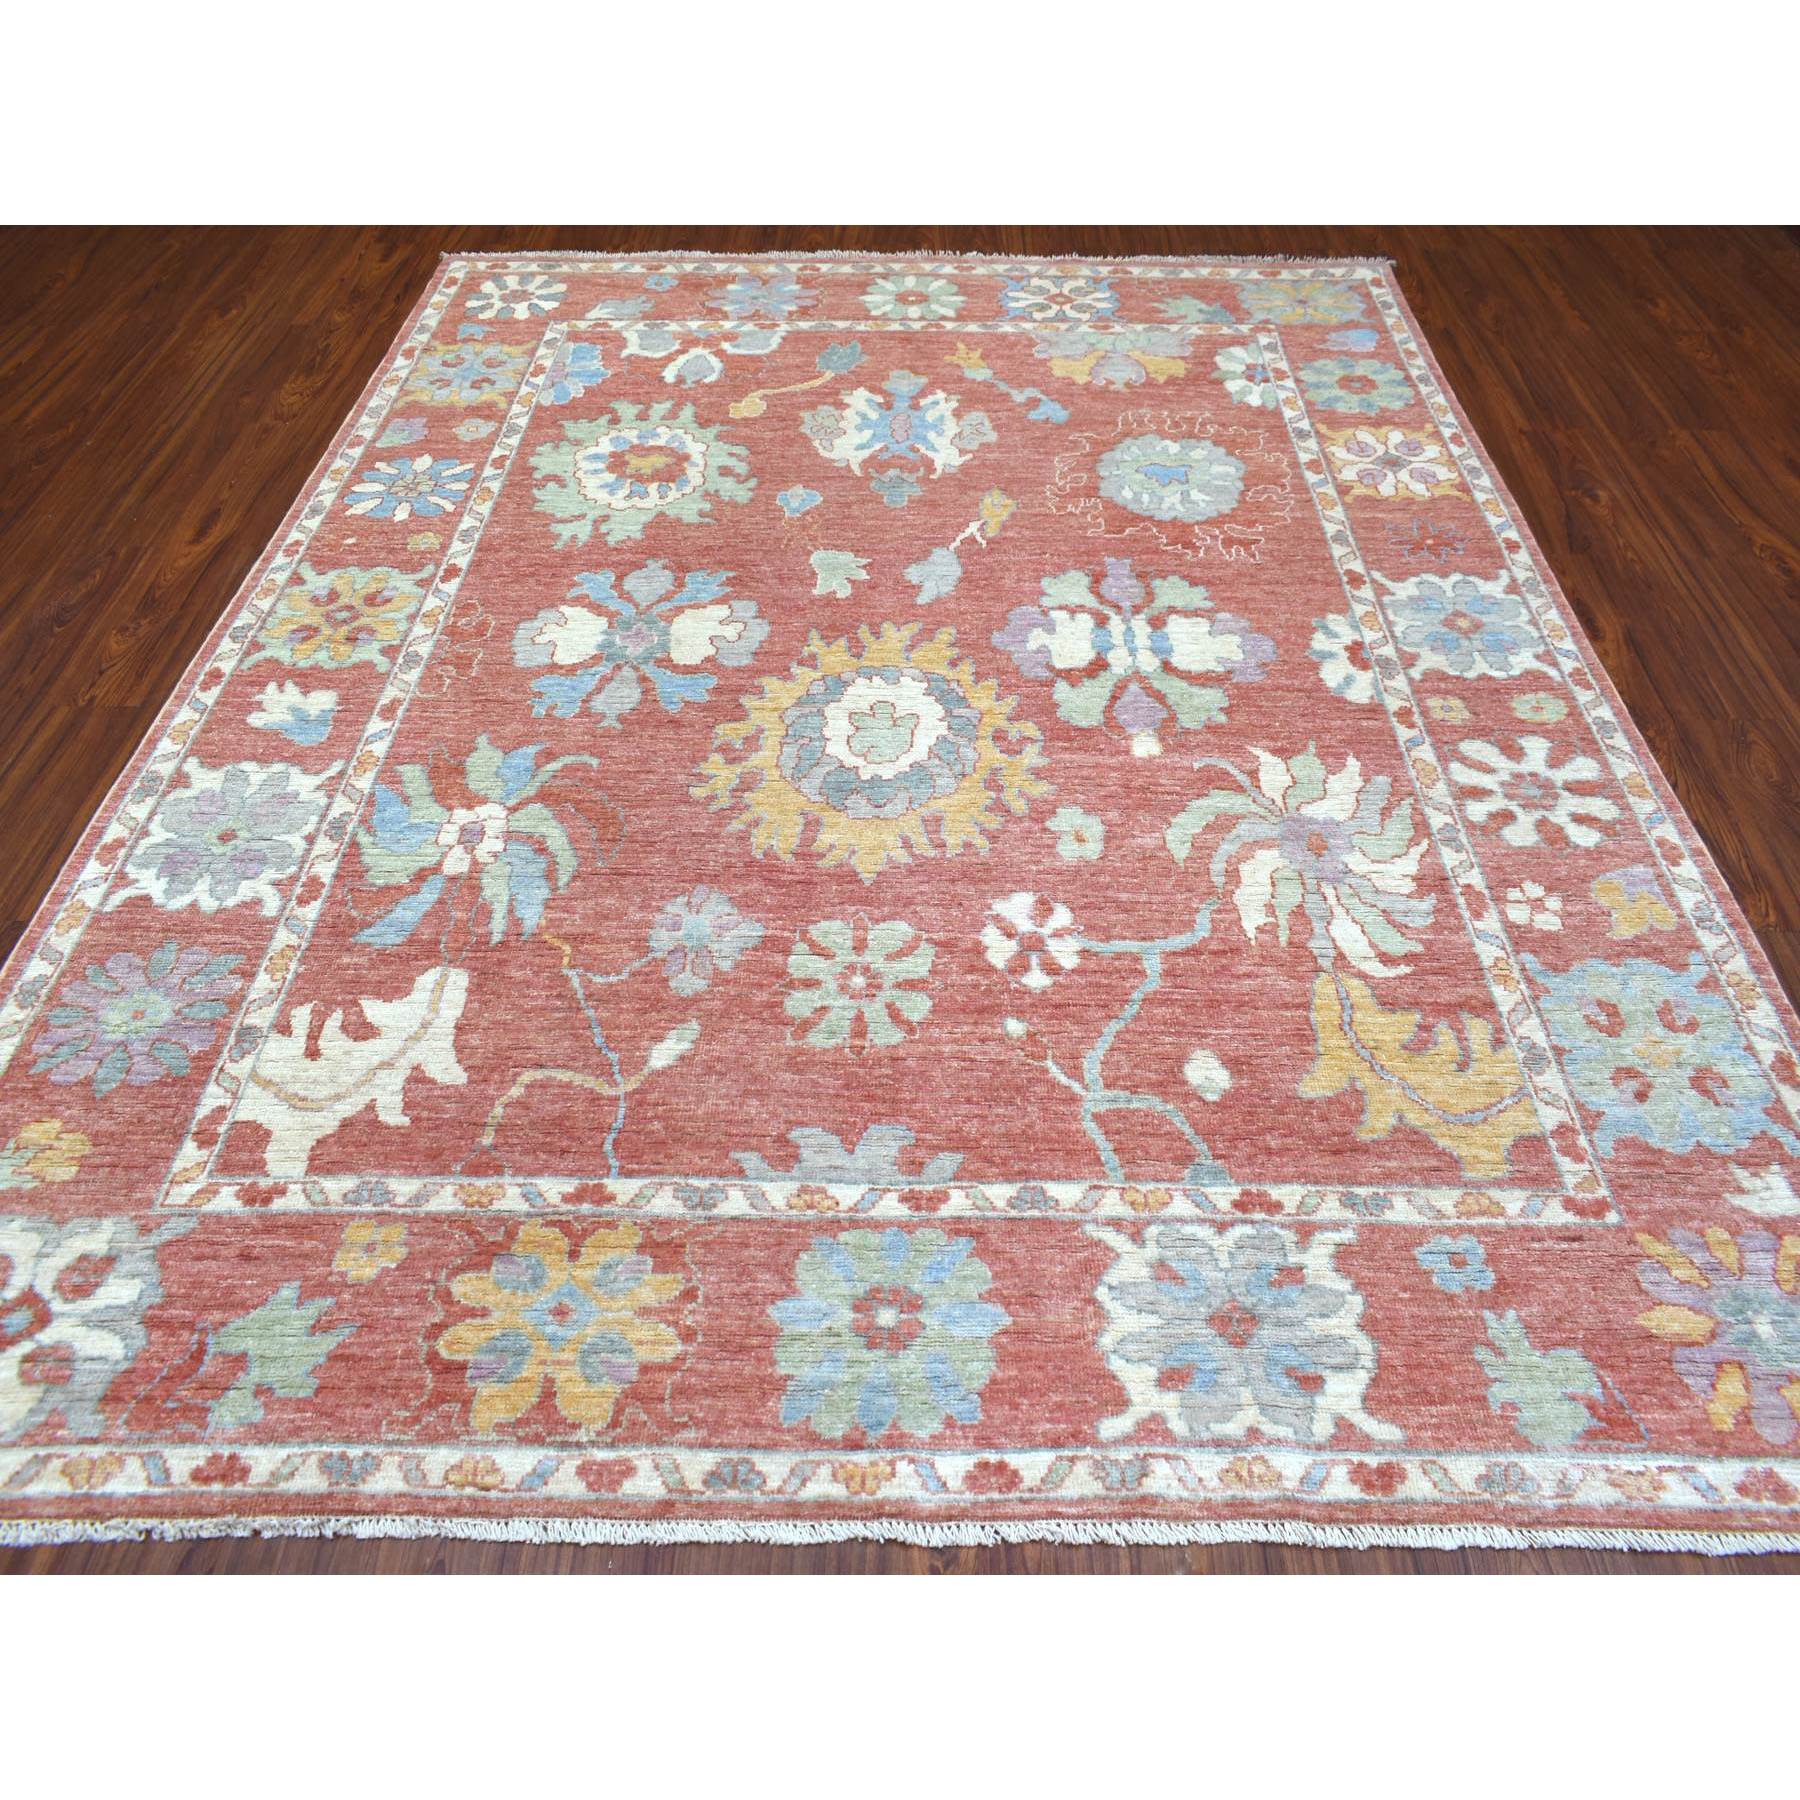 8'x9'9" Coral Red Afghan Angora Ushak with a Beautiful, Floral Pattern Hand Woven Pure Wool Oriental Rug 